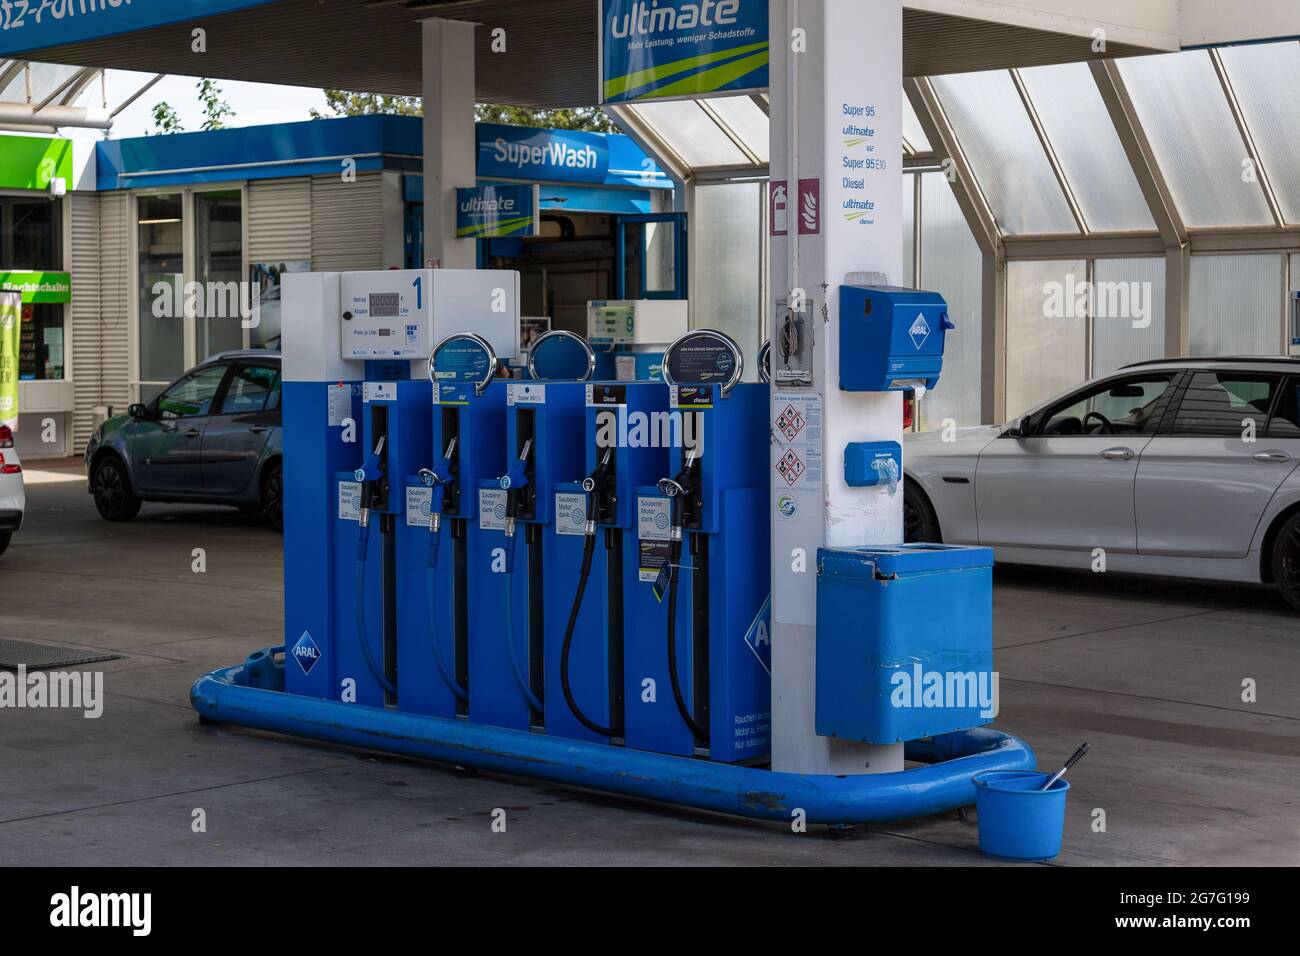 NEUWIED, GERMANY - Jun 20, 2021: Gas pumps in an ARAL gas station.Aral is a brand of automobile gasl stations in Germany Stock Photo